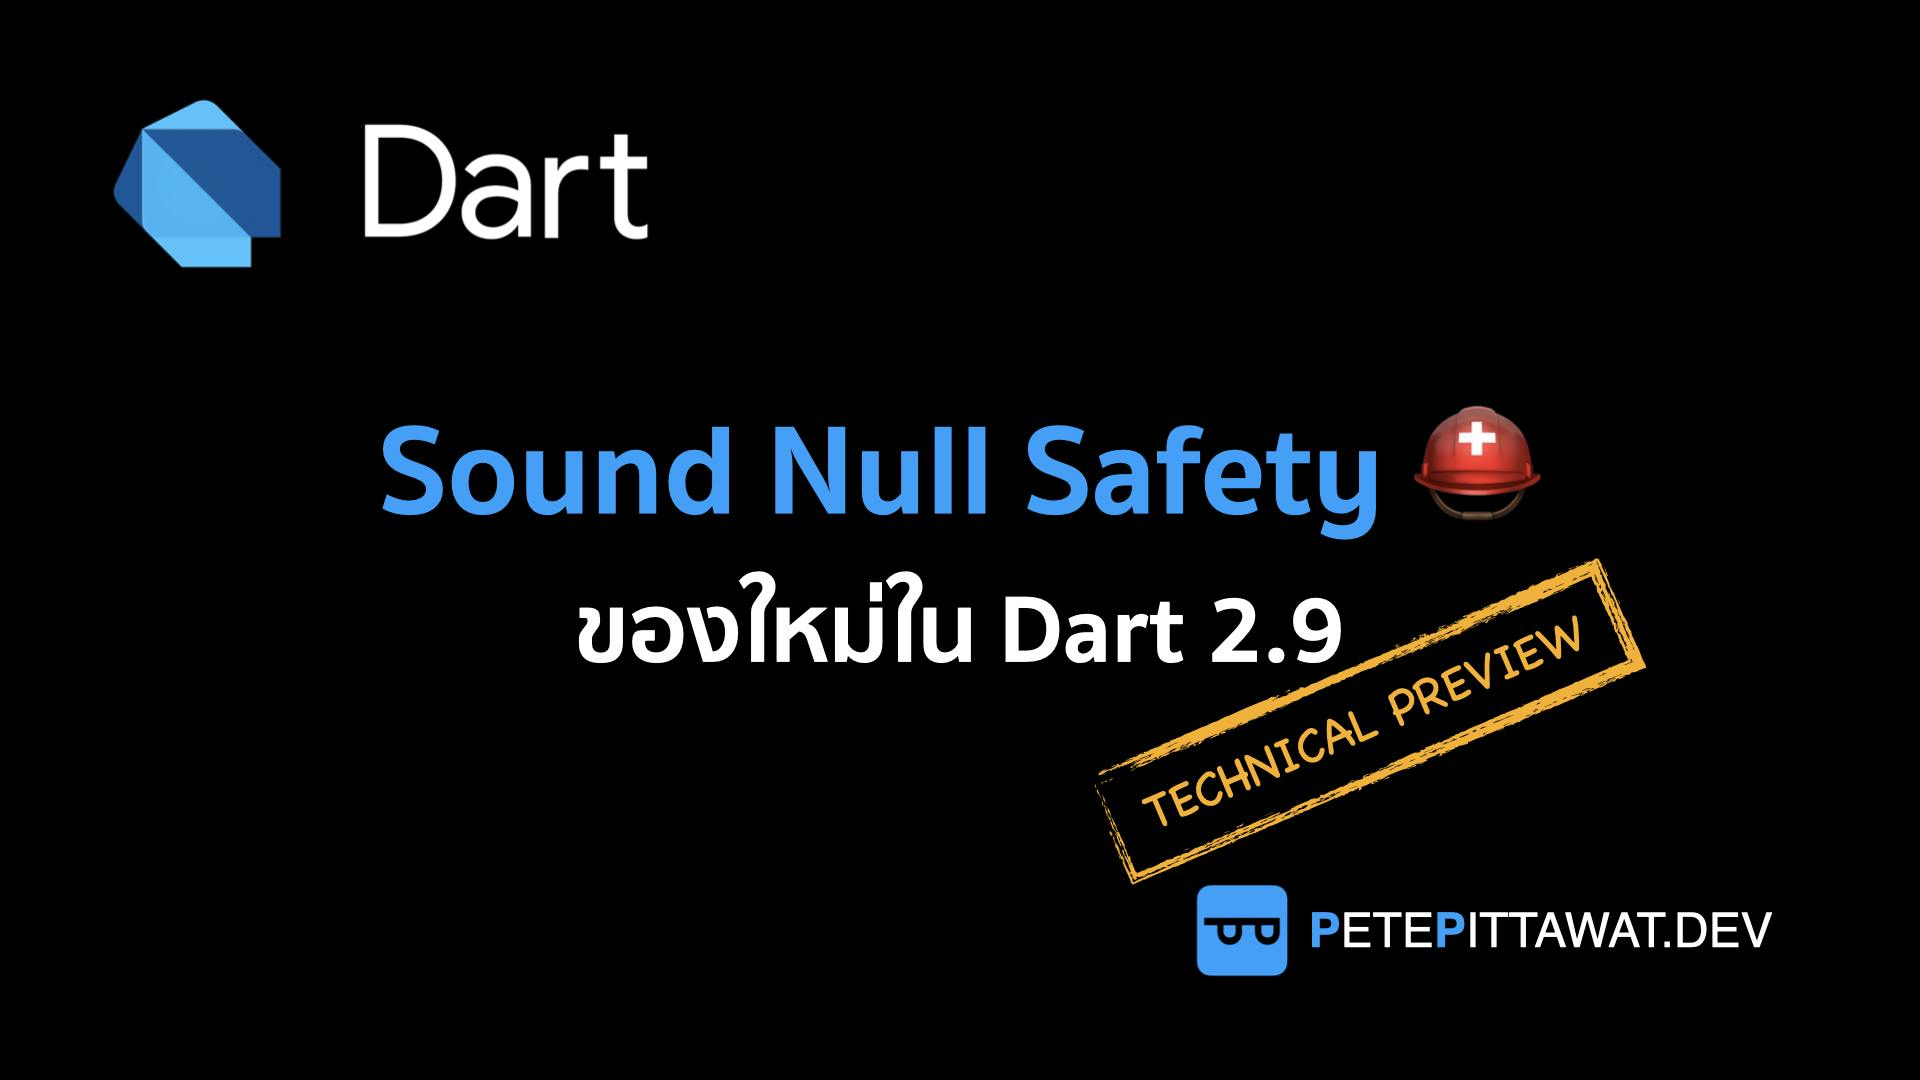 Cover Image for Dart: Sound Null Safety กำลังมาใน Dart 2.9!